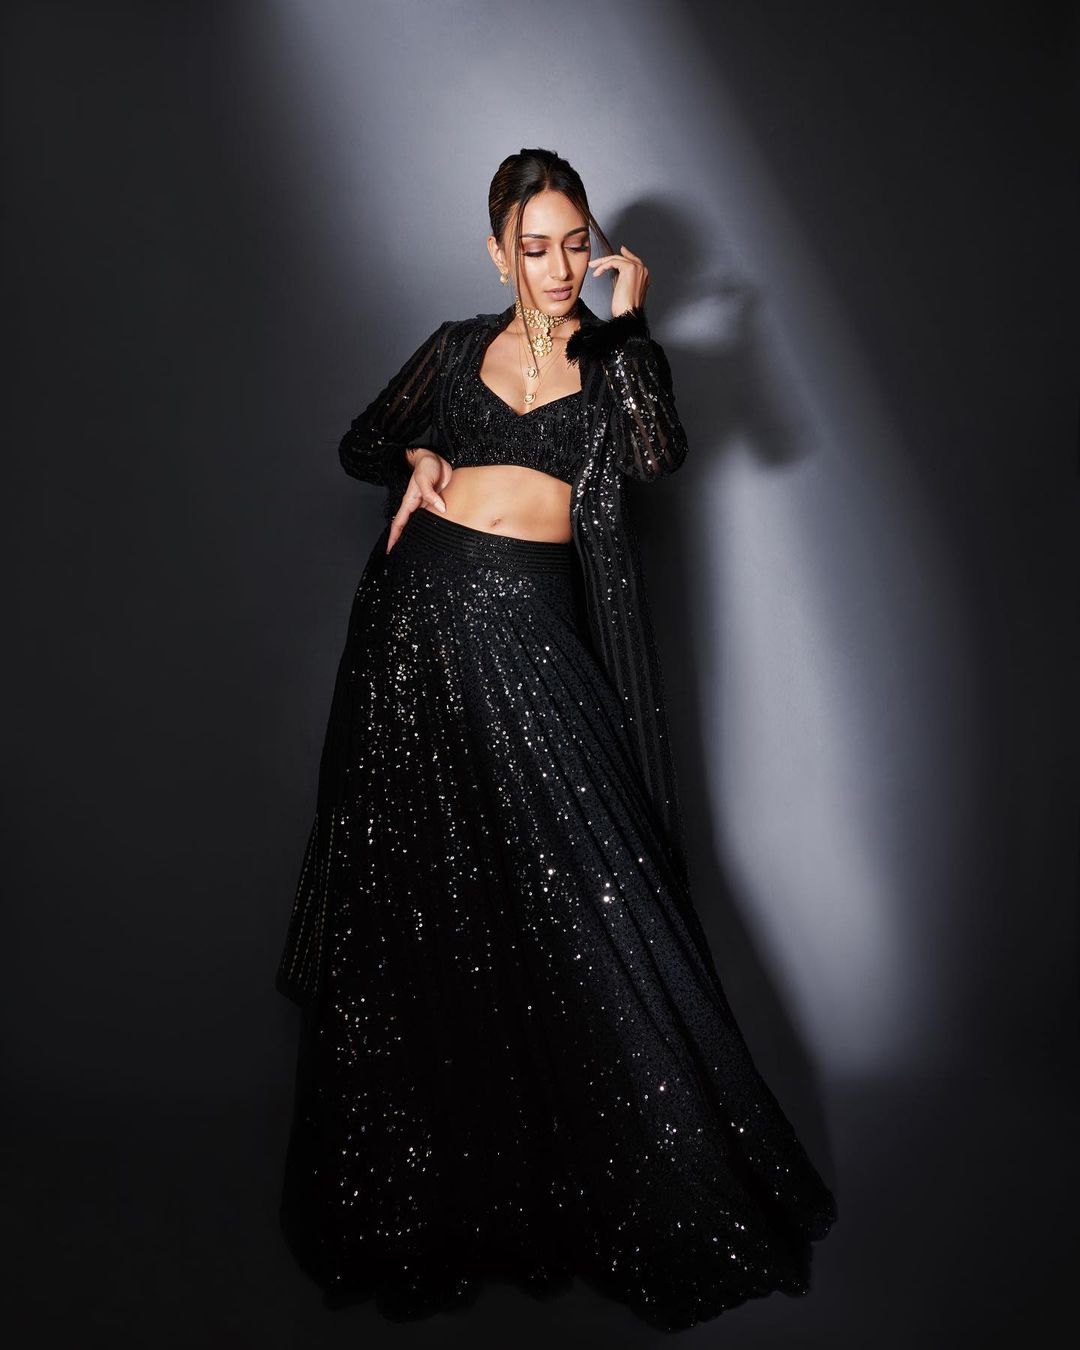 Erica Fernandes looks sexy in the black shimmery lehenga